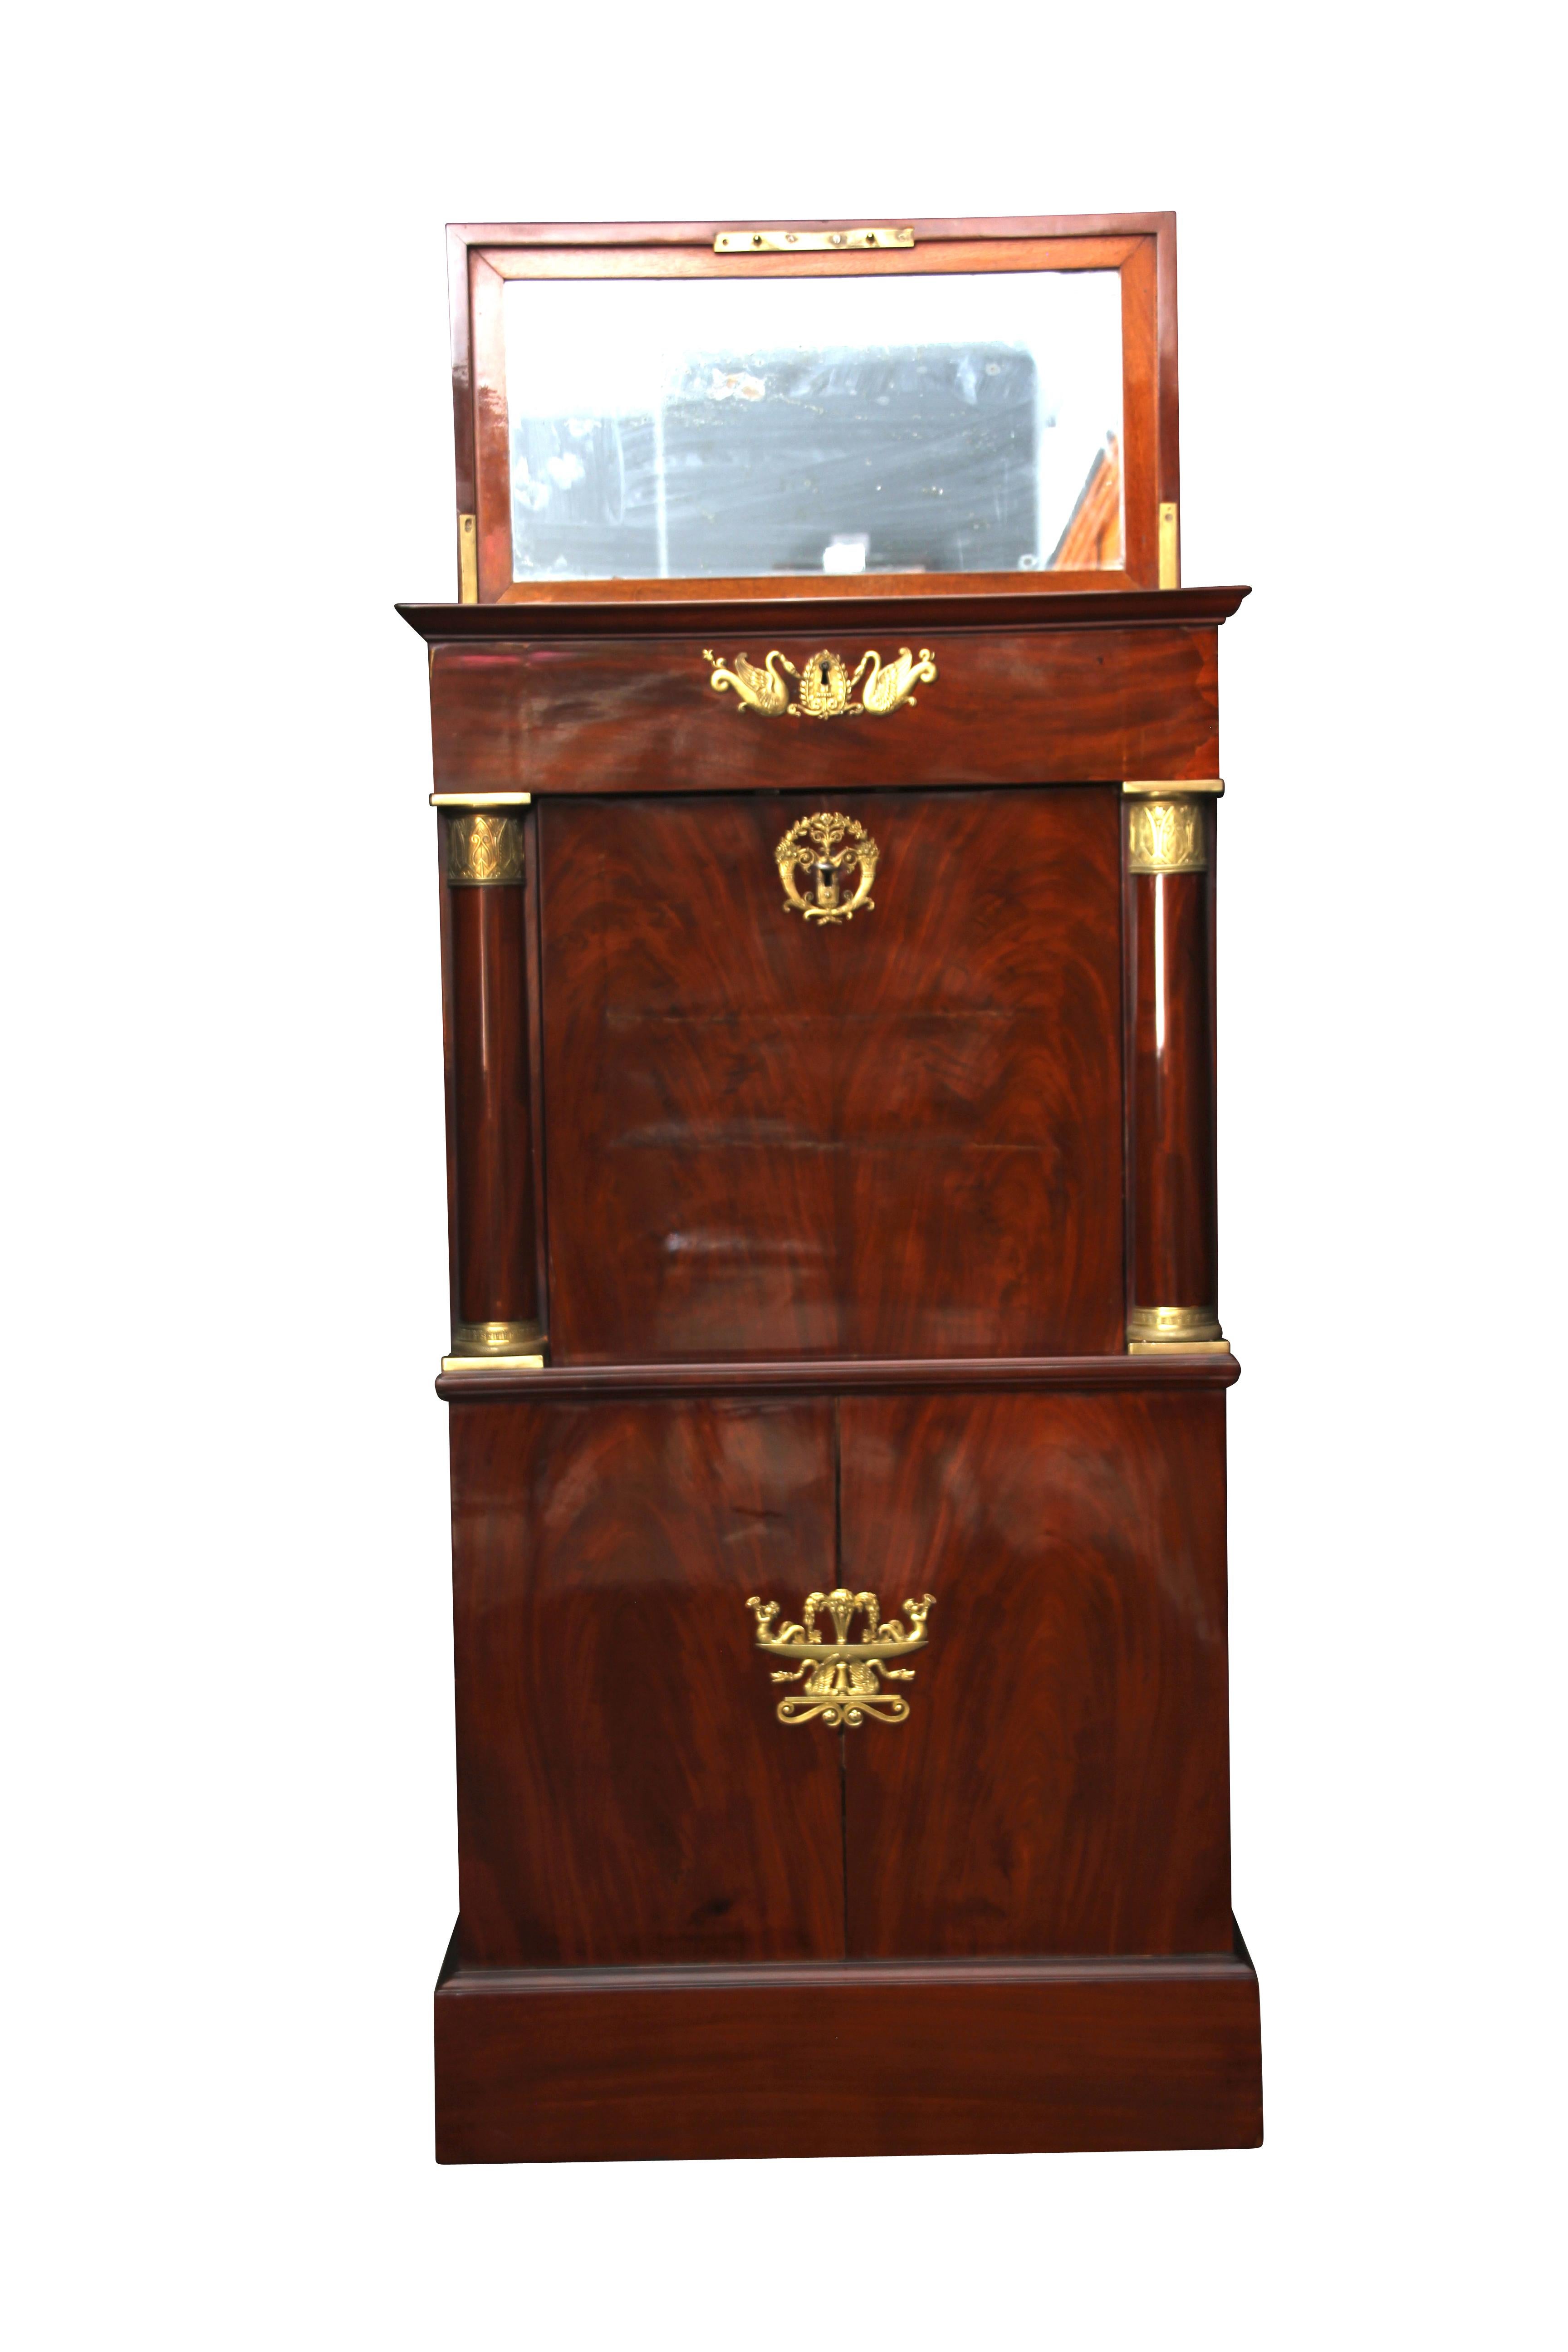 Fine, unusual, petite Empire so called Secretaire / Secretary Desk / Escritoire from France around 1810.
Excellent hand-made craftmanship with fine bronzes, fold-out writing plate, long drawers on the side. Lockable top compartments with mirror